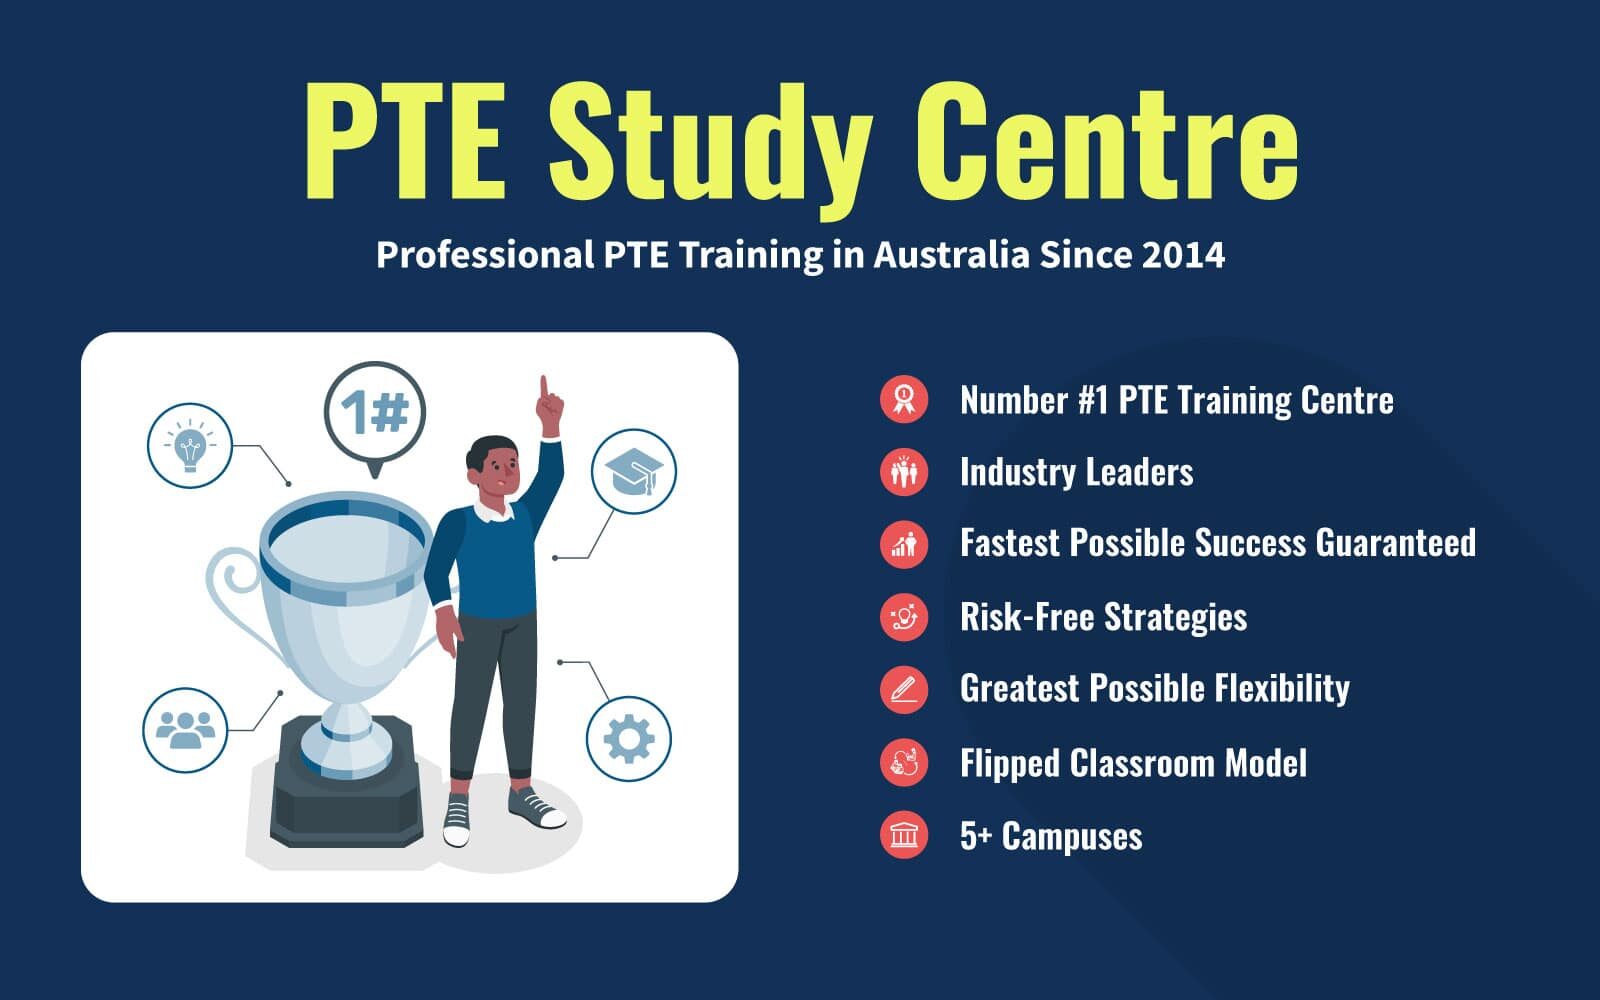 Why is PTE Study Centre the Best in Australia?